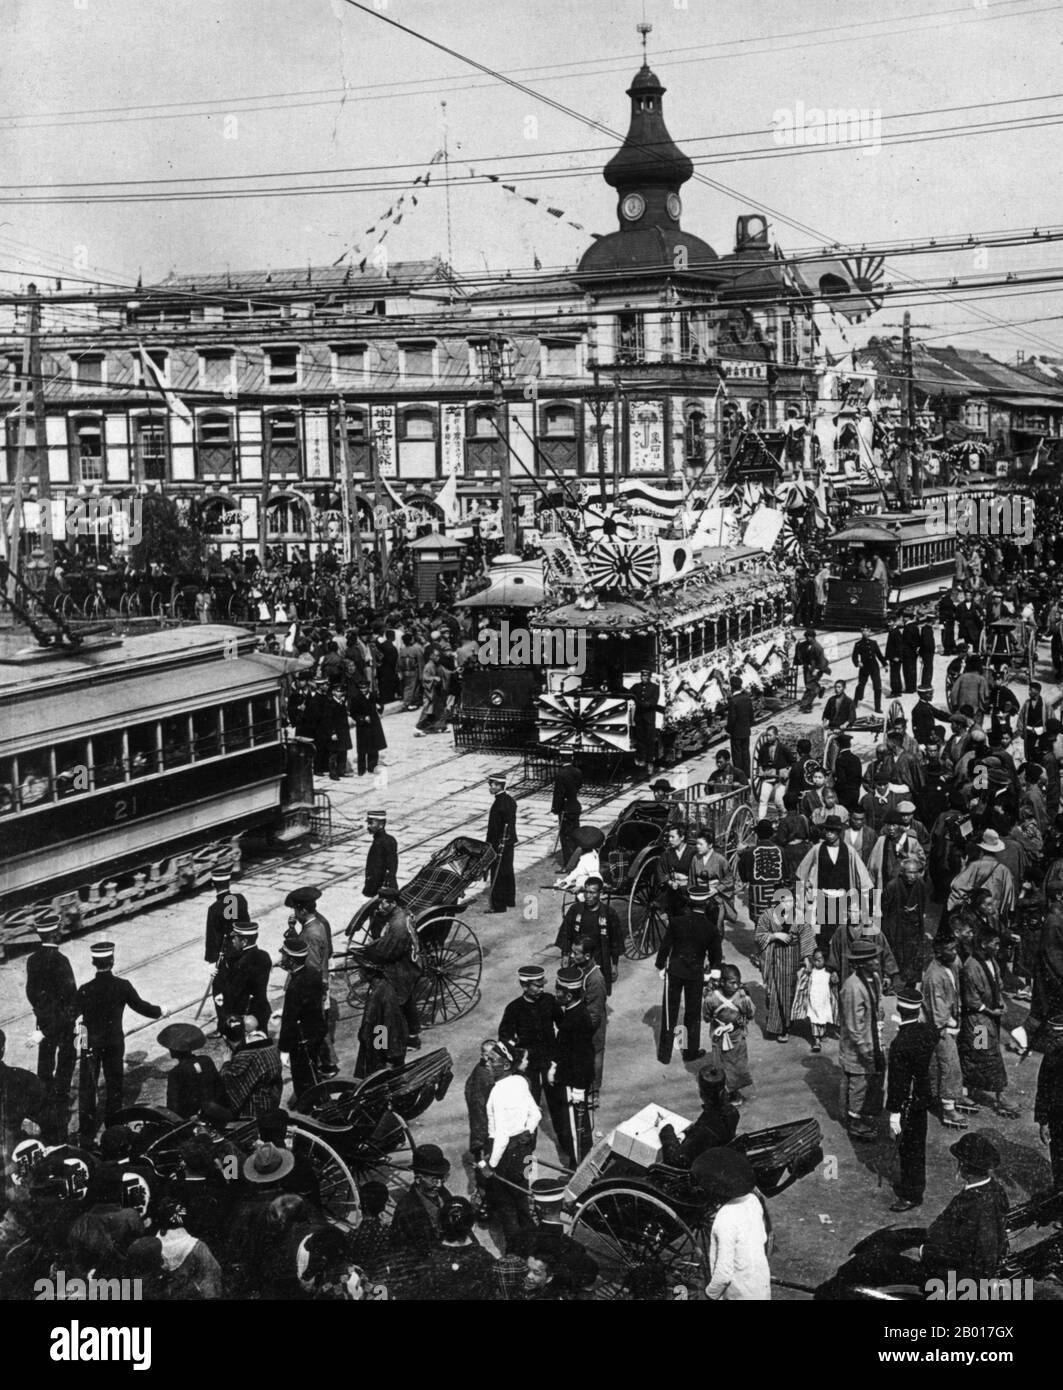 Japan: A crowded Tokyo street scene, 23 November 1905.  By the turn of the 20th century Tokyo was already a busy, developing city with a large population and heavy traffic including street trams. Stock Photo